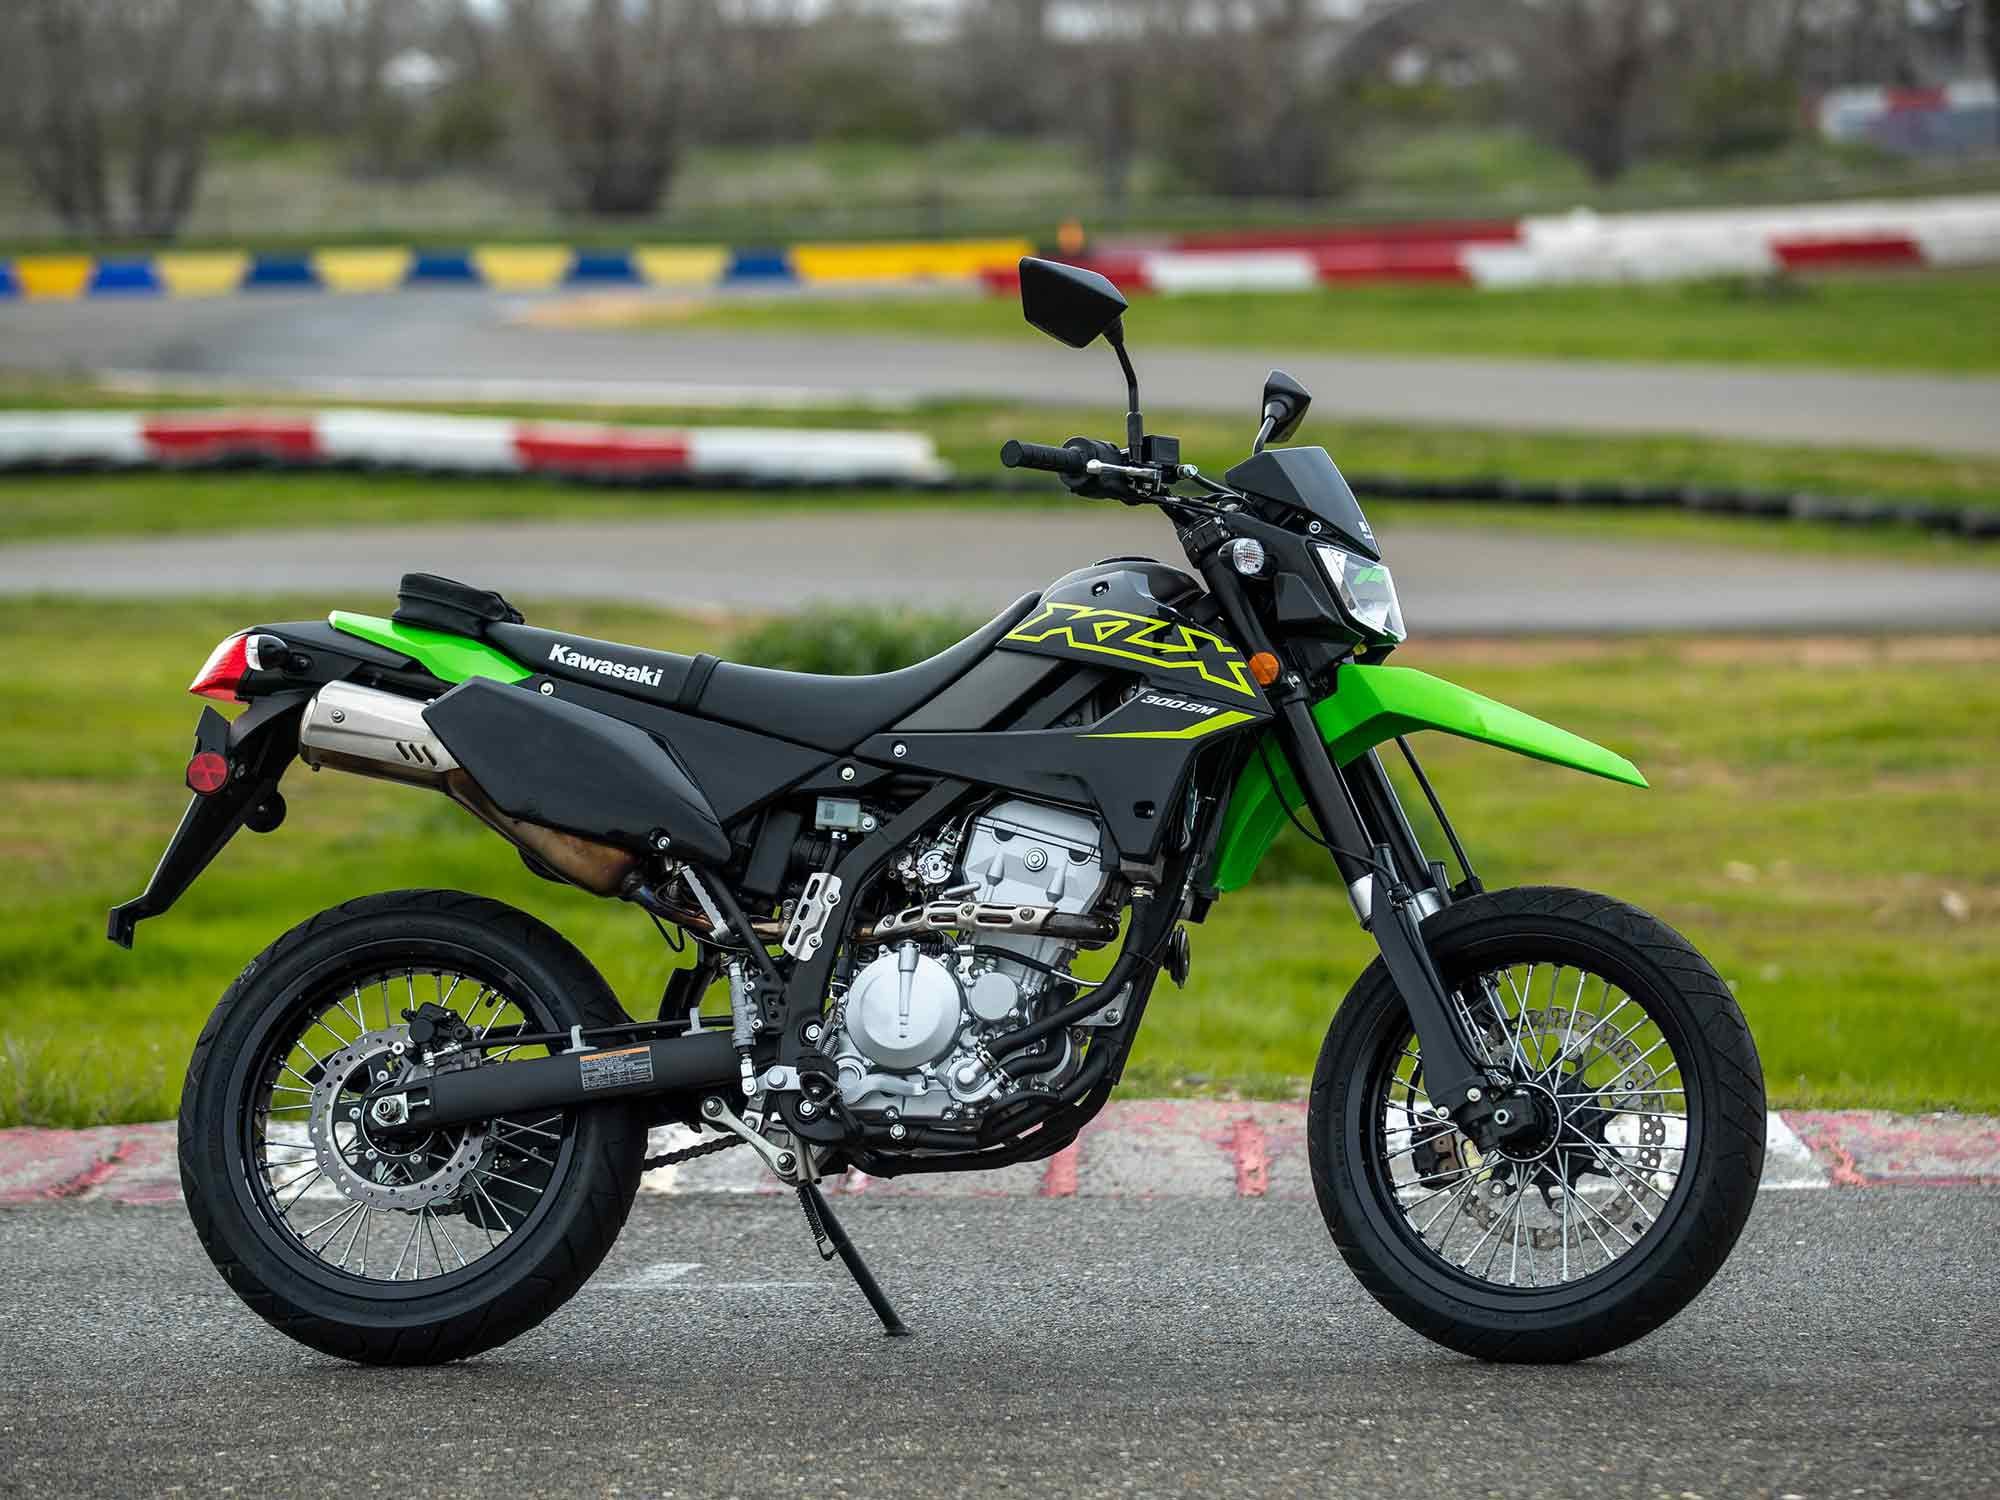 Supermoto-sized 17-inch wheels, shorter suspension, and a larger front brake differentiate the KLX300SM from its dual sport sibling.